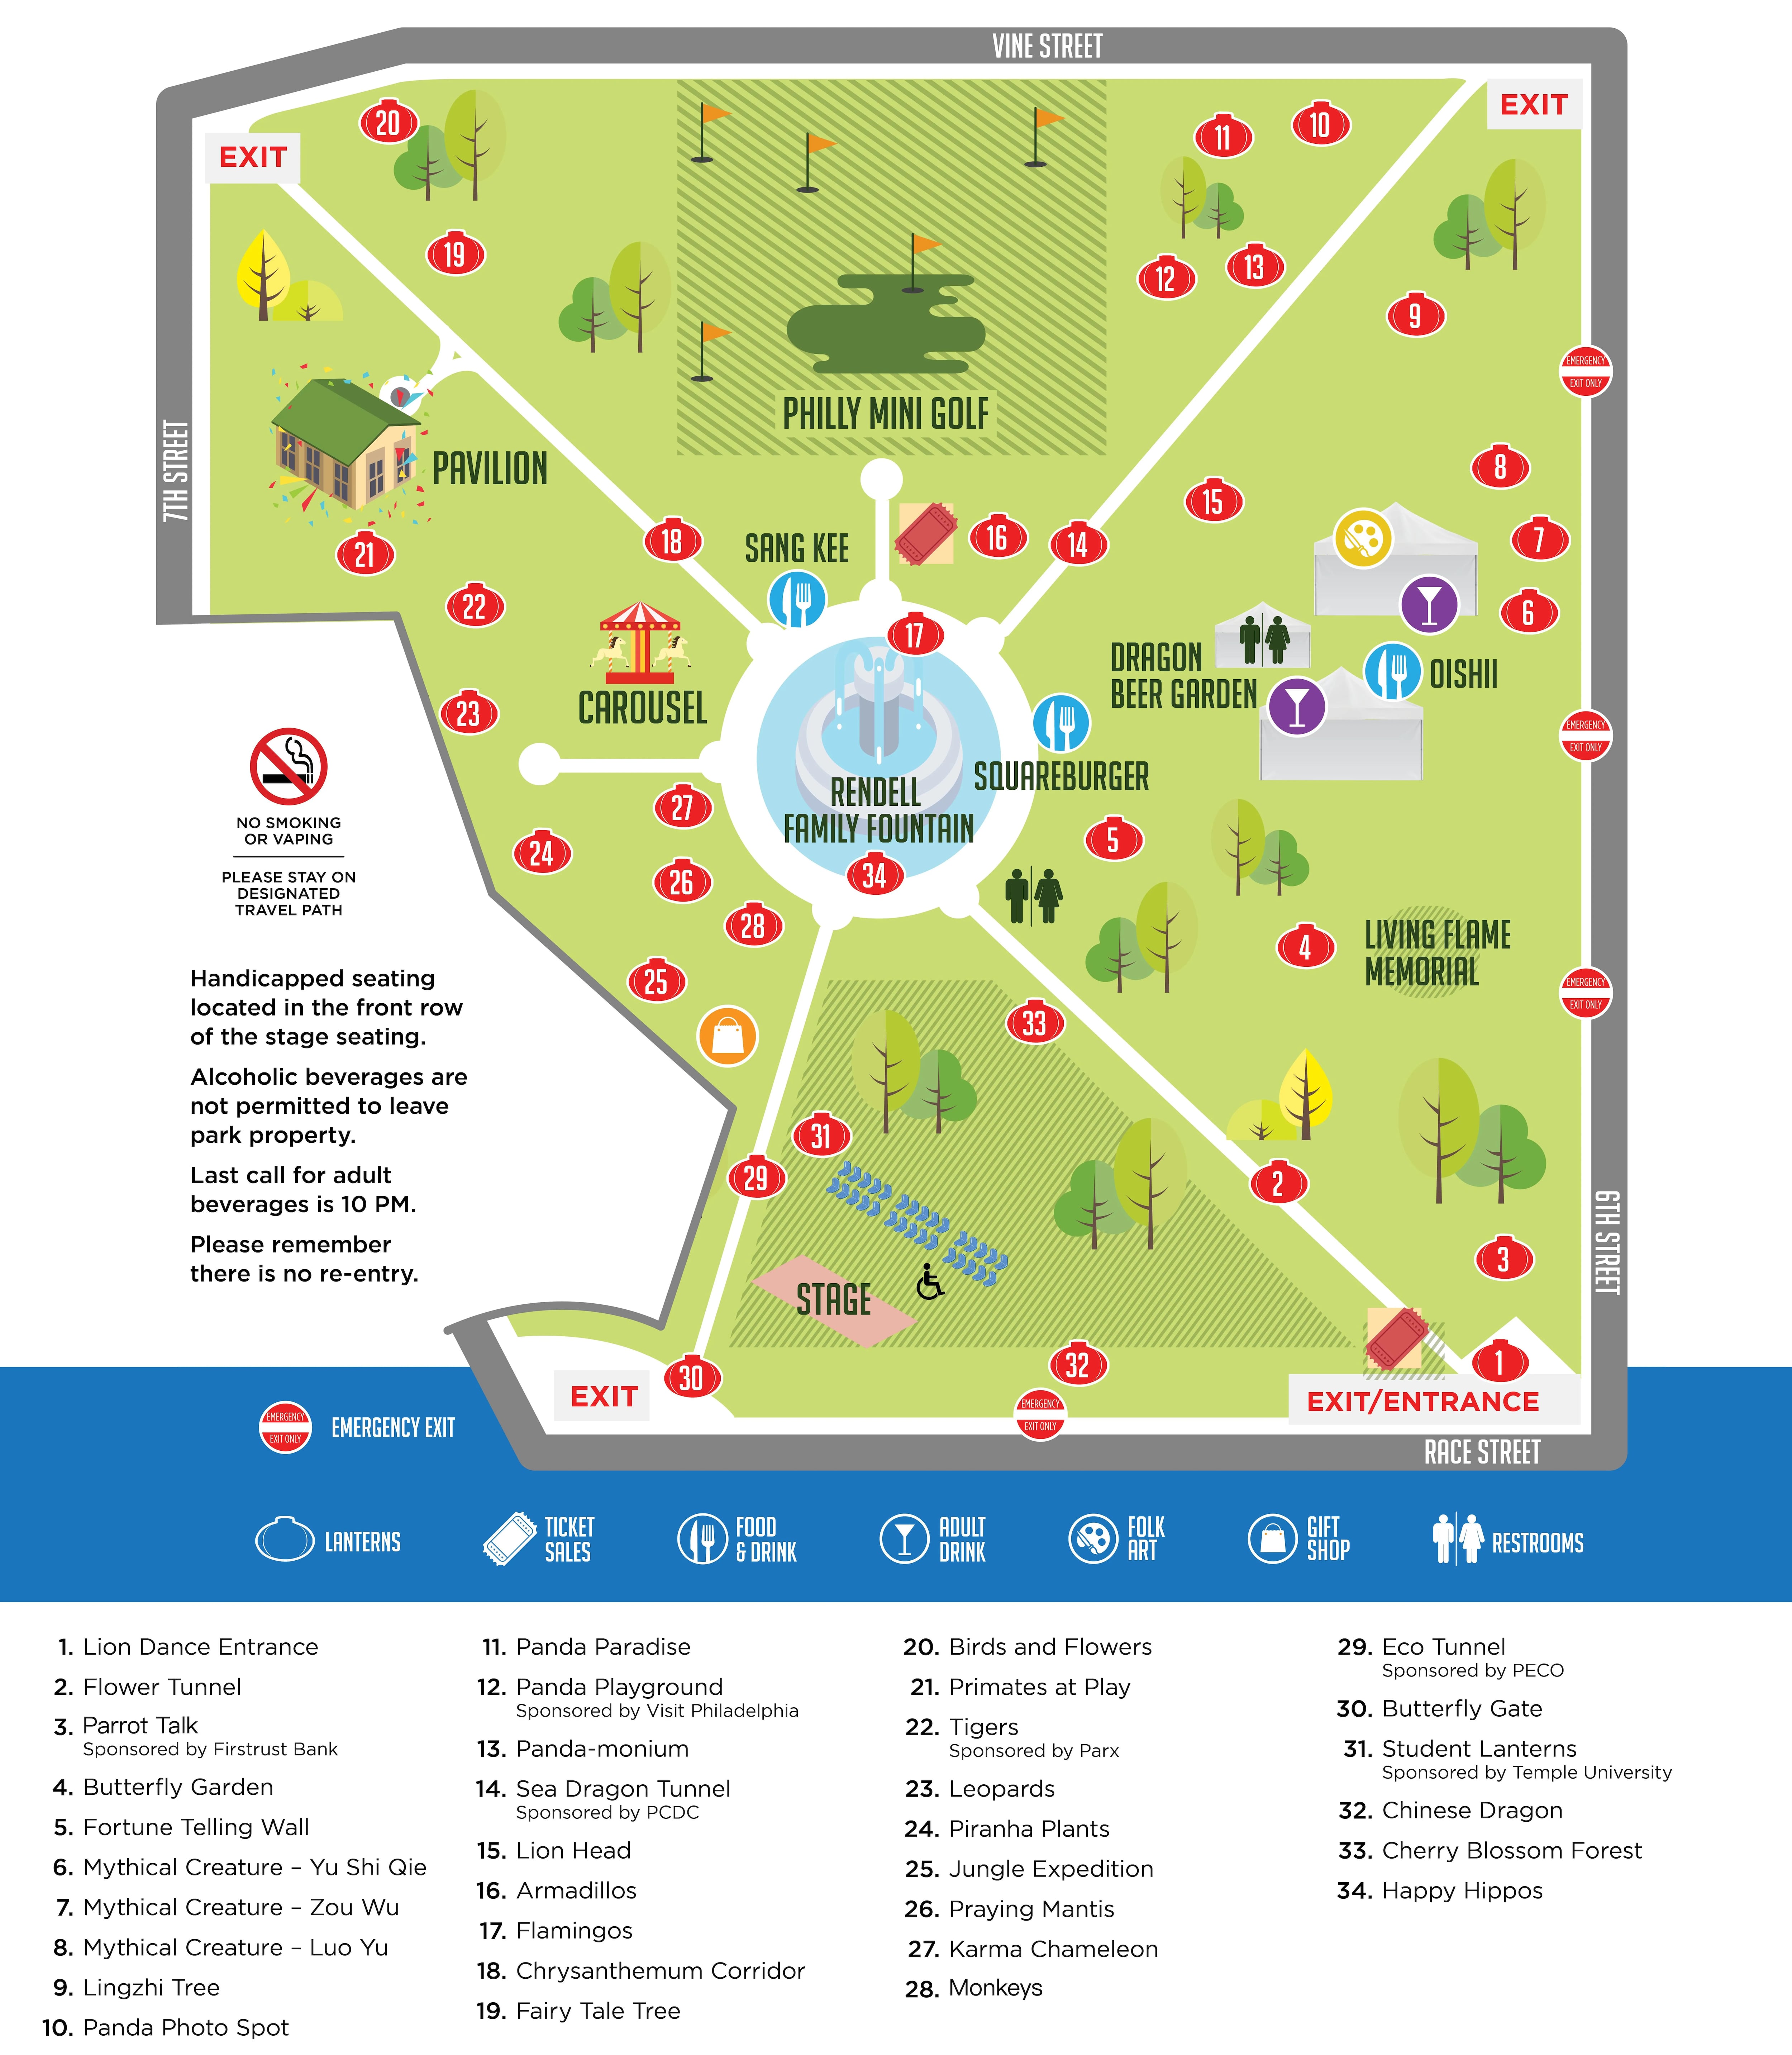 This map of the Philadelphia Chinese Lantern Festival can help you find the lantern displays, food spots, and restrooms.